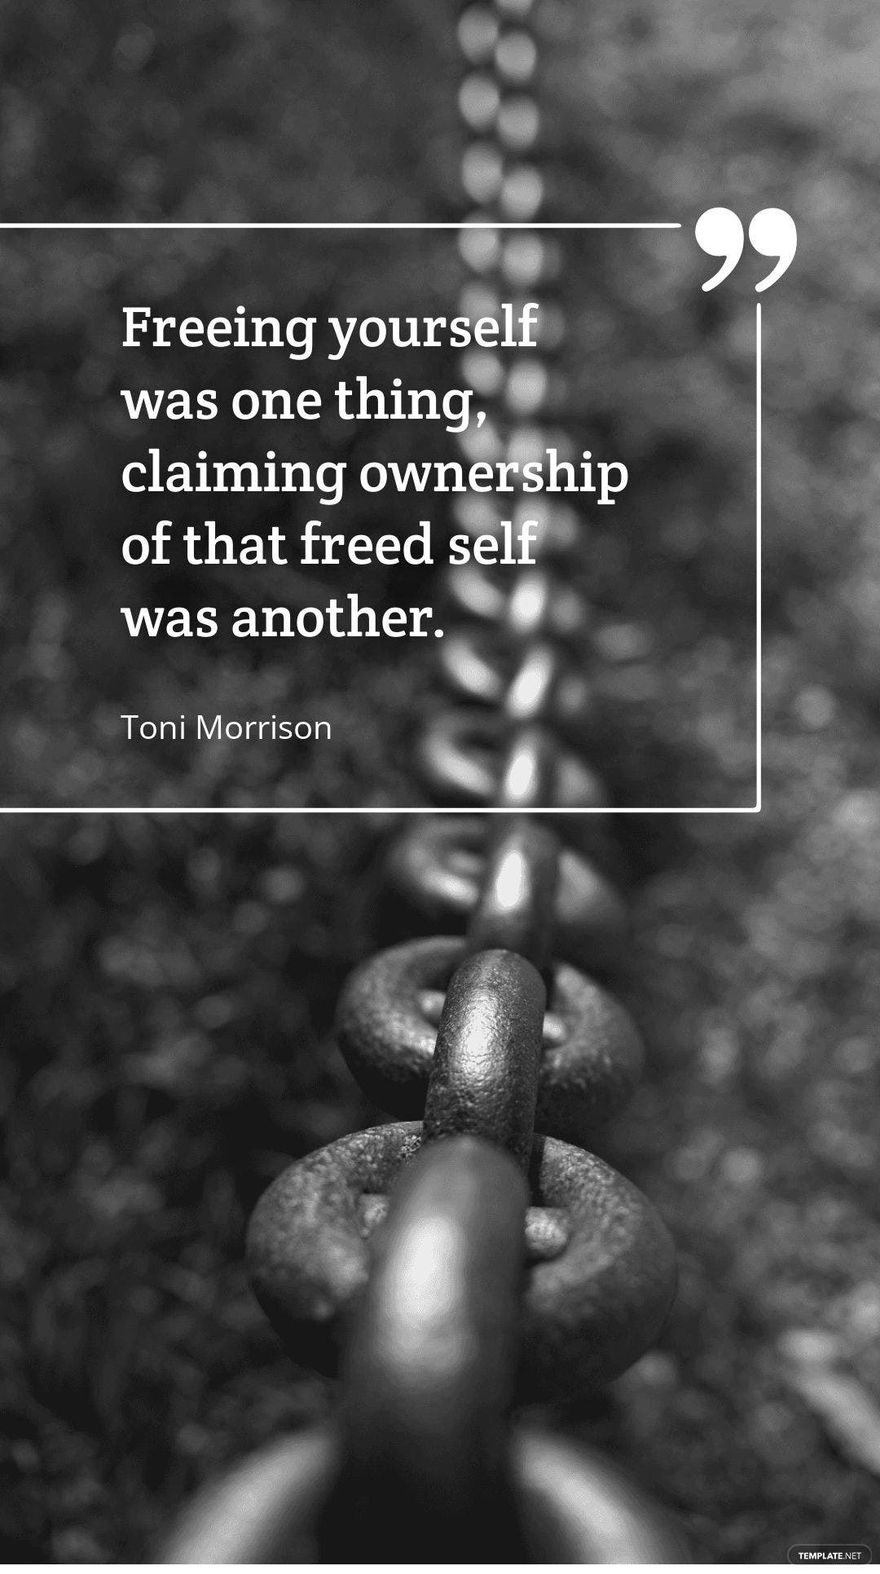 Toni Morrison - Freeing yourself was one thing, claiming ownership of that freed self was another.